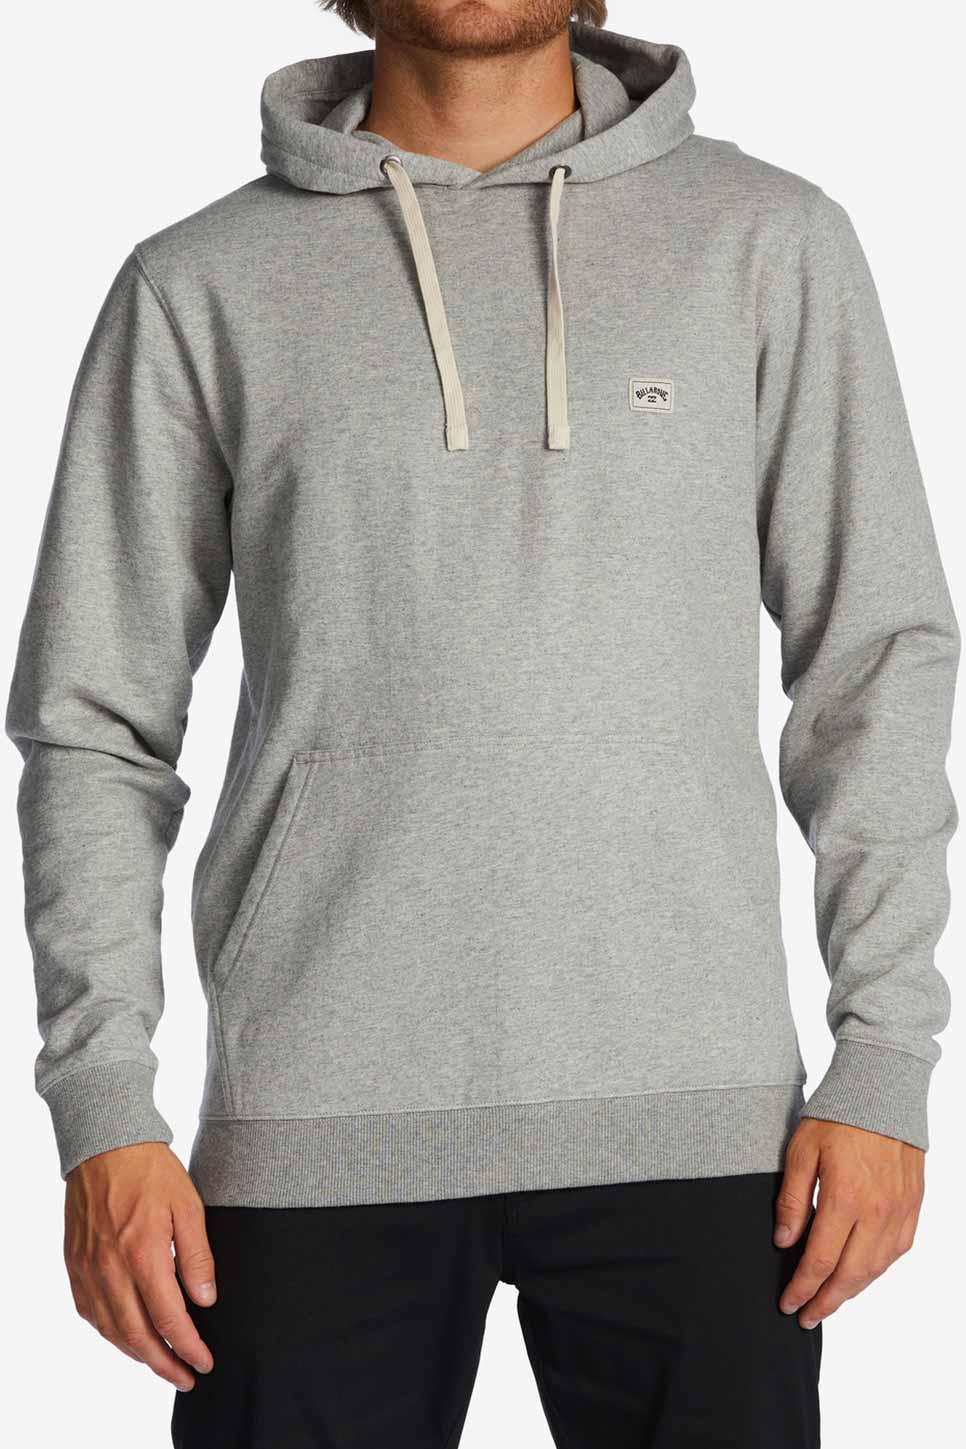 Billabong - All Day PO Hoodie - Grey Heather - Front